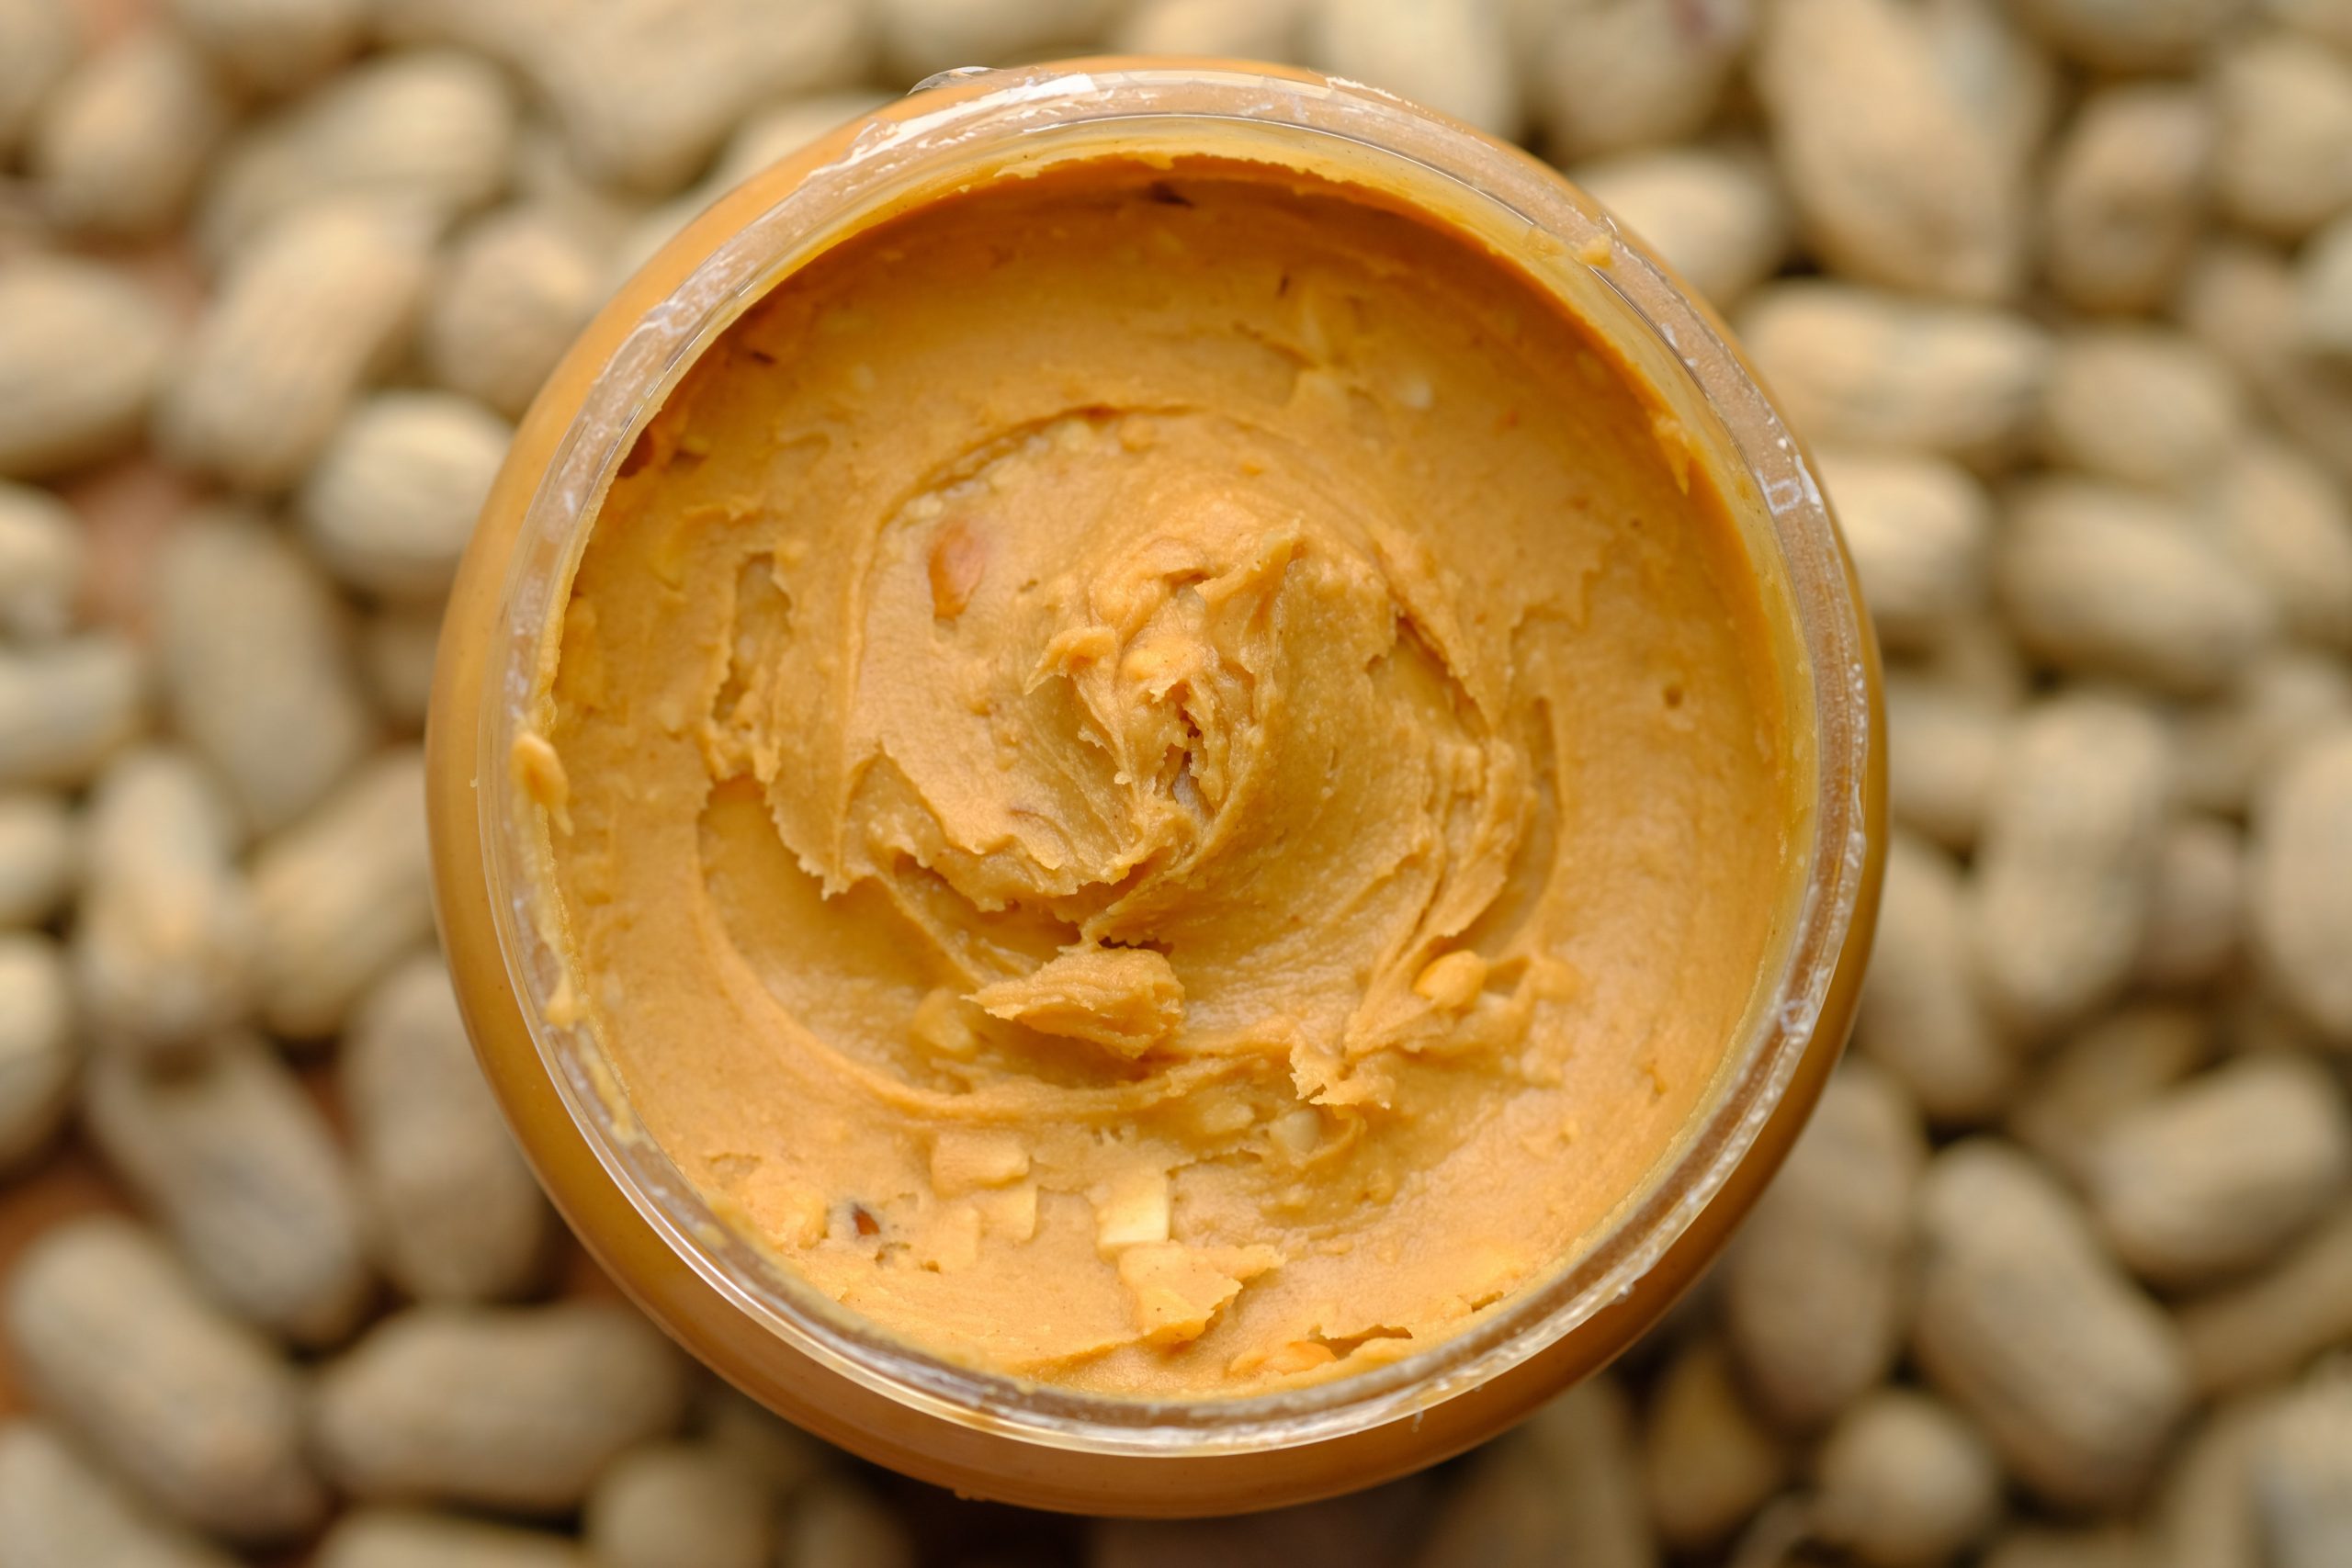 Jif peanut butter recalled in US due to potential Salmonella contamination